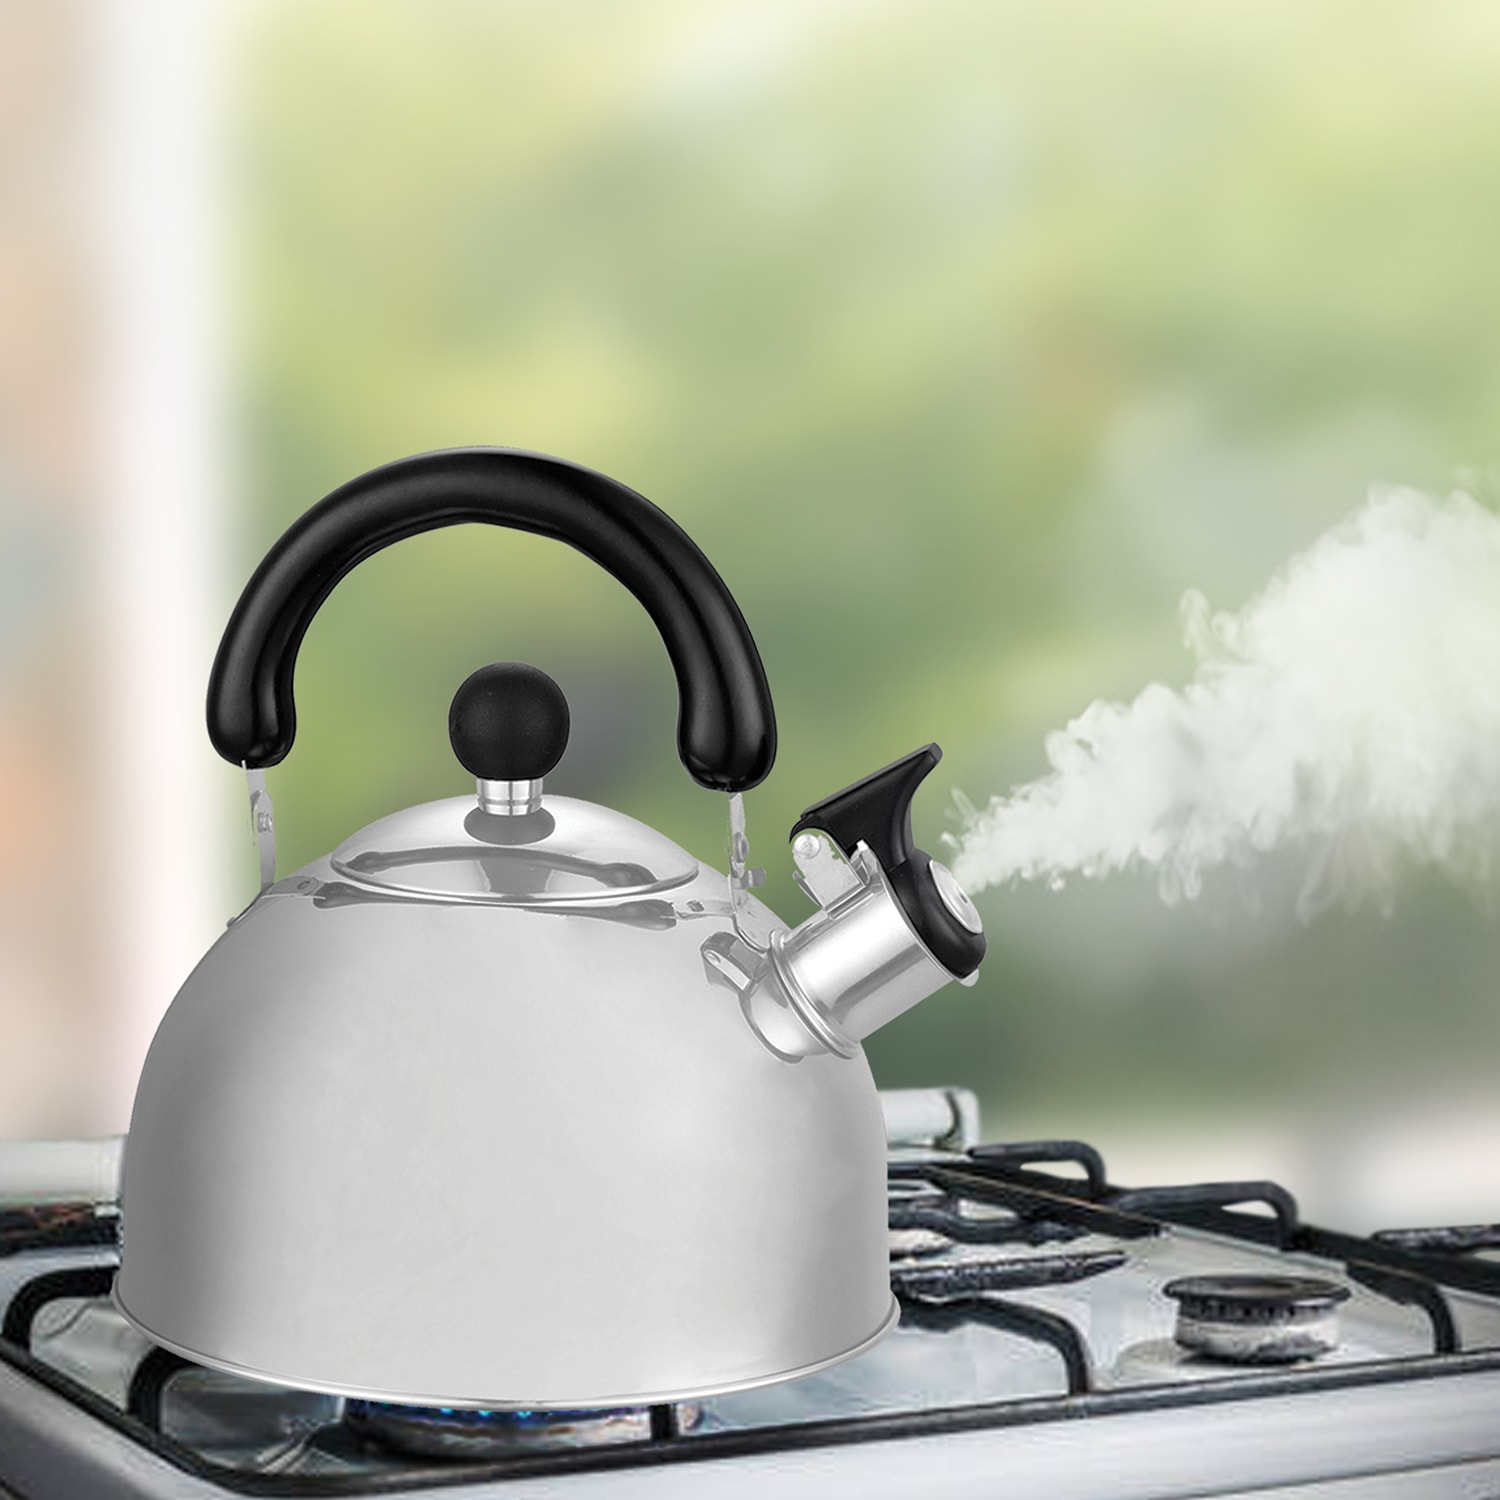 Masflex Stainless Steel Whistling Kettle